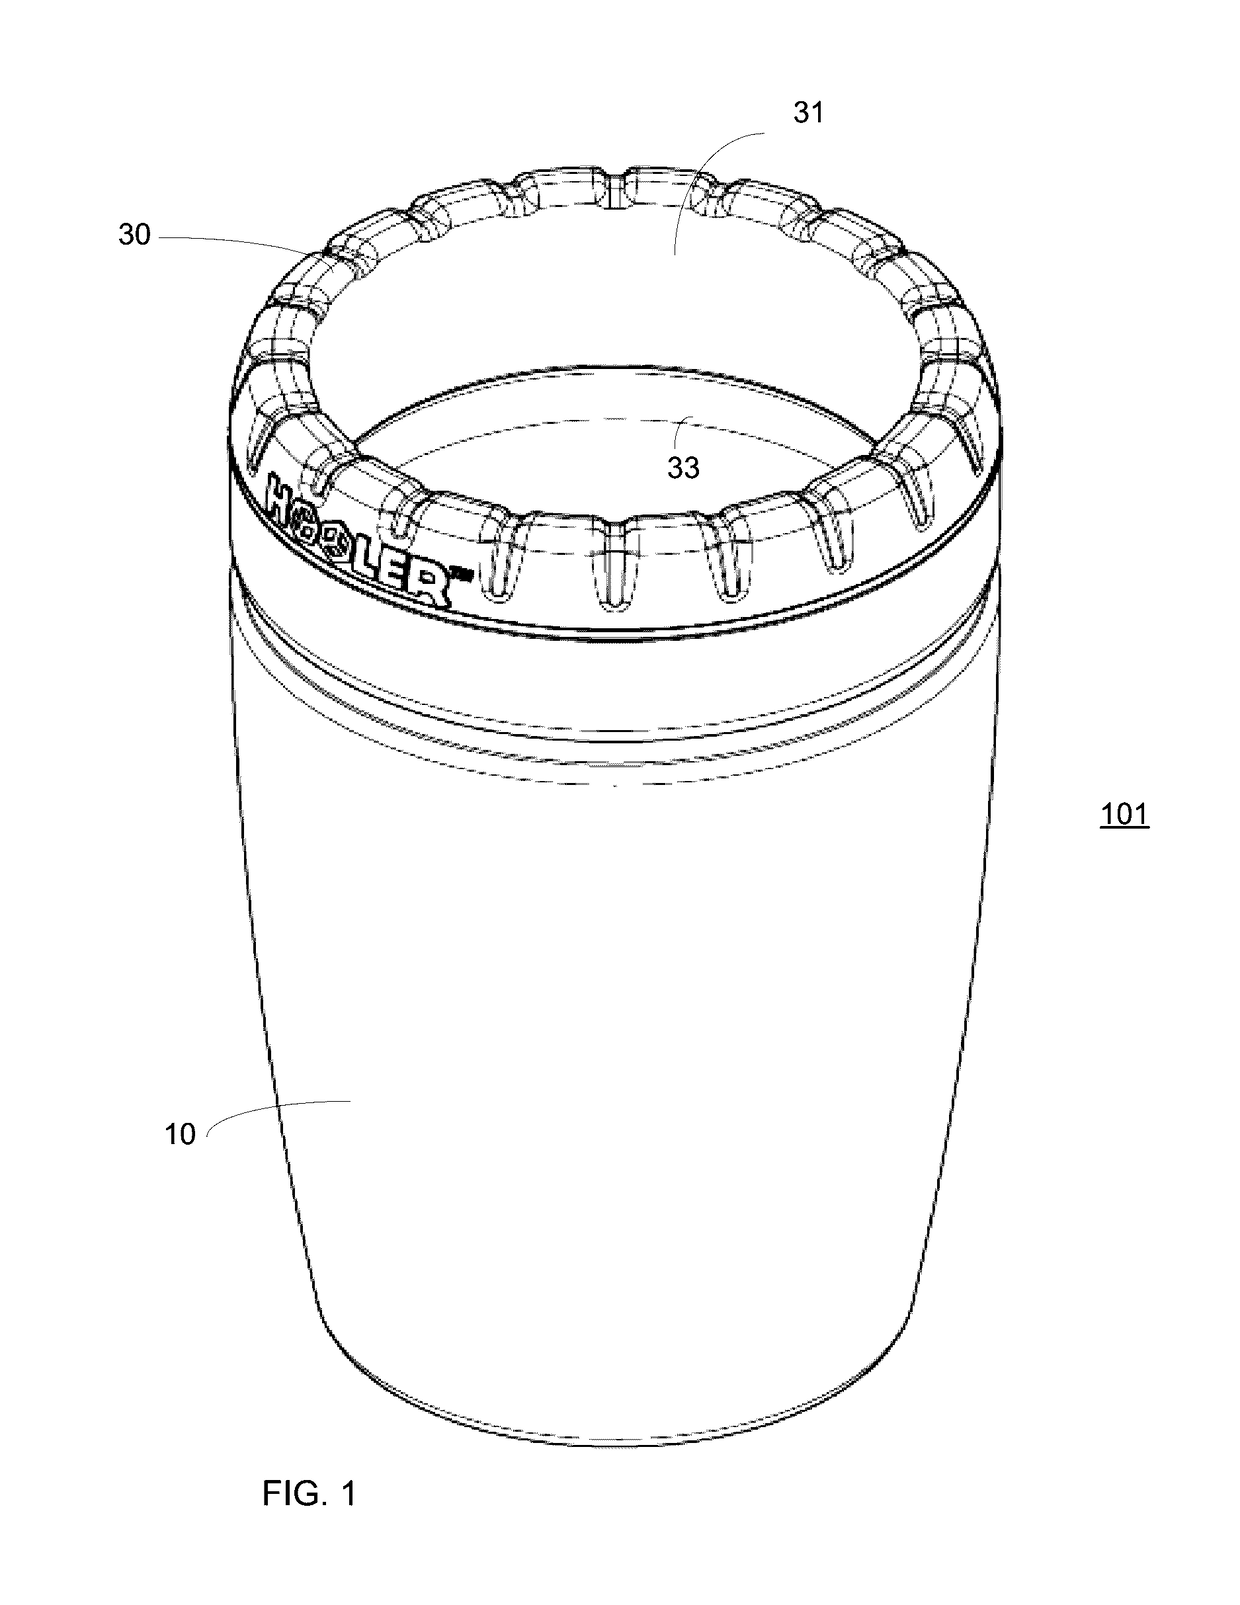 Apparatus and method for beverage container cooler with deflected compliant seal